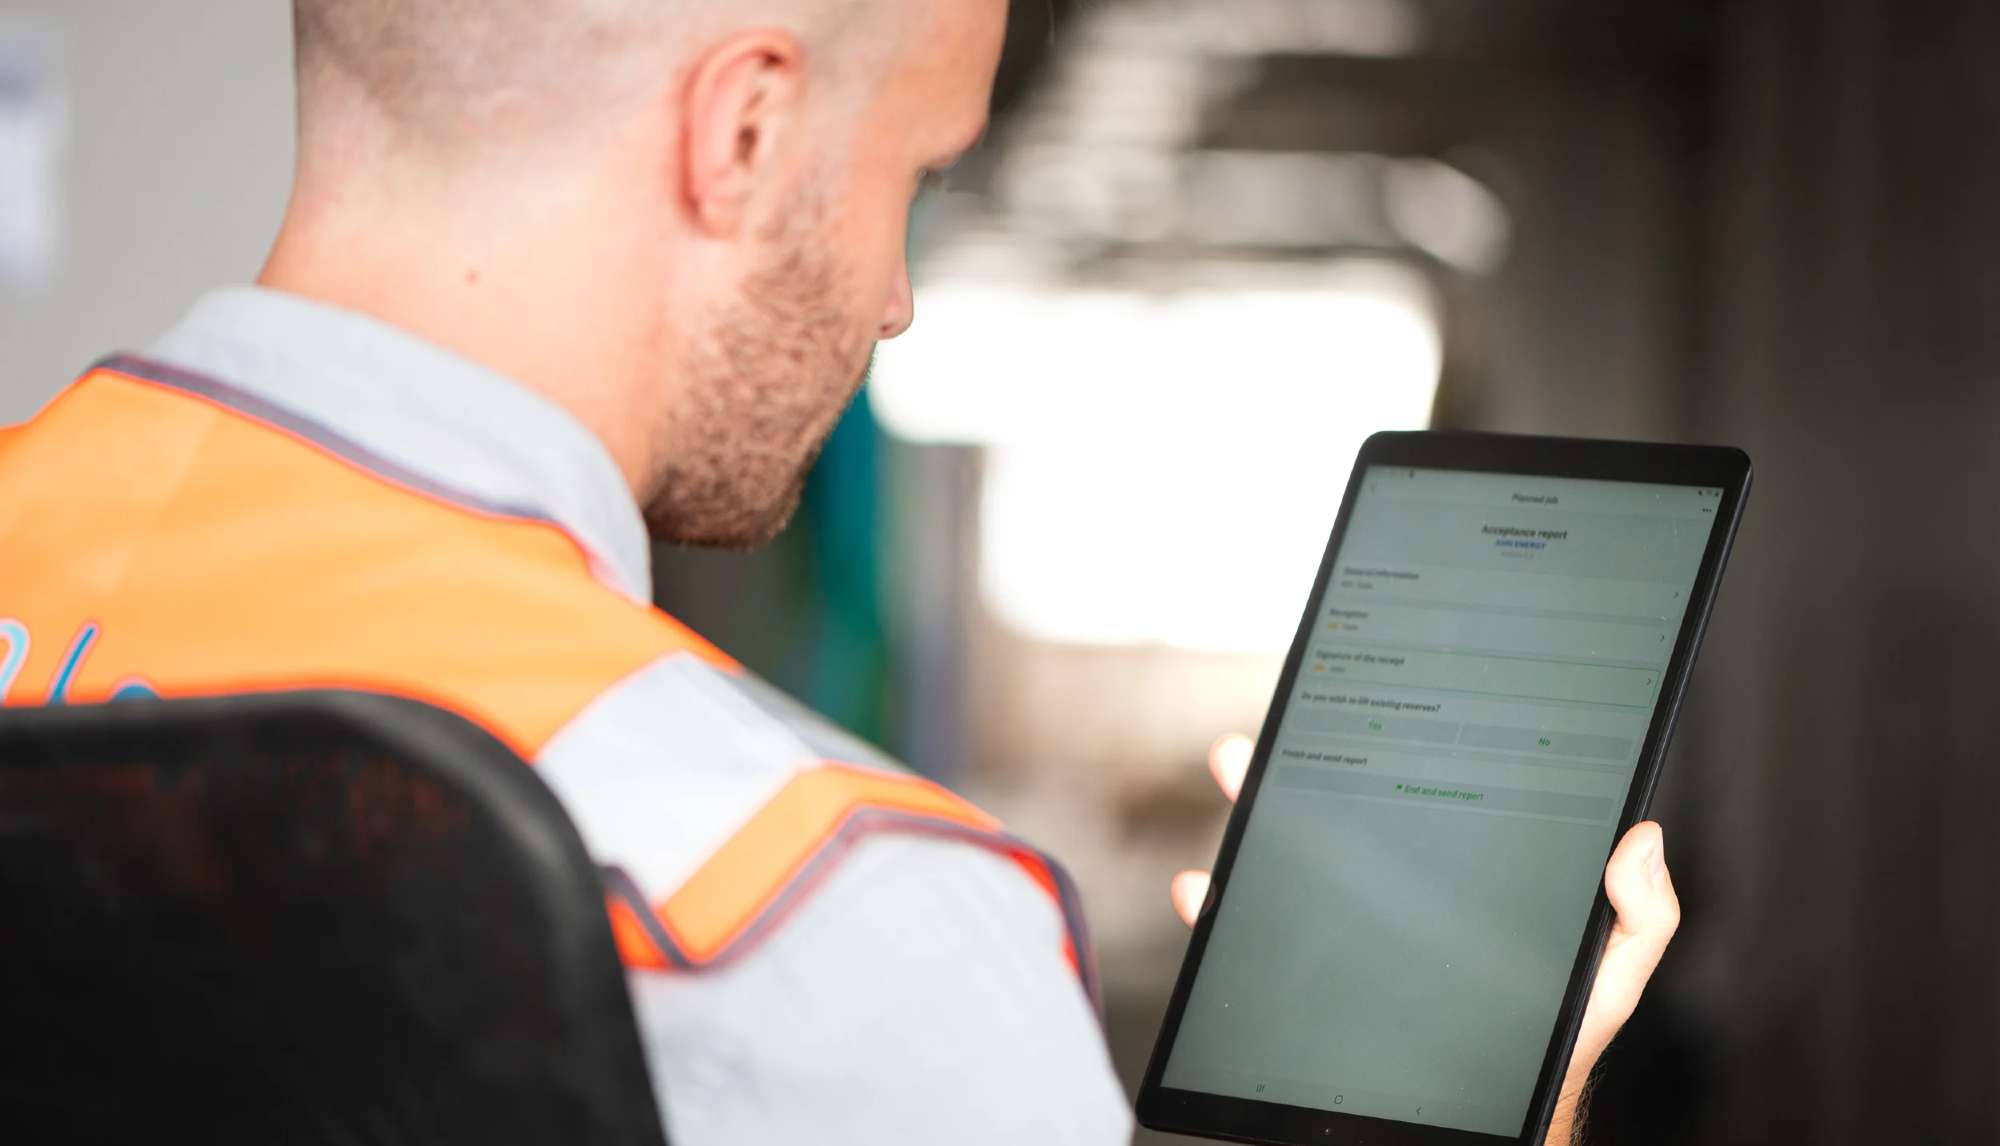 Converting your field data into value with mobile workforce management software